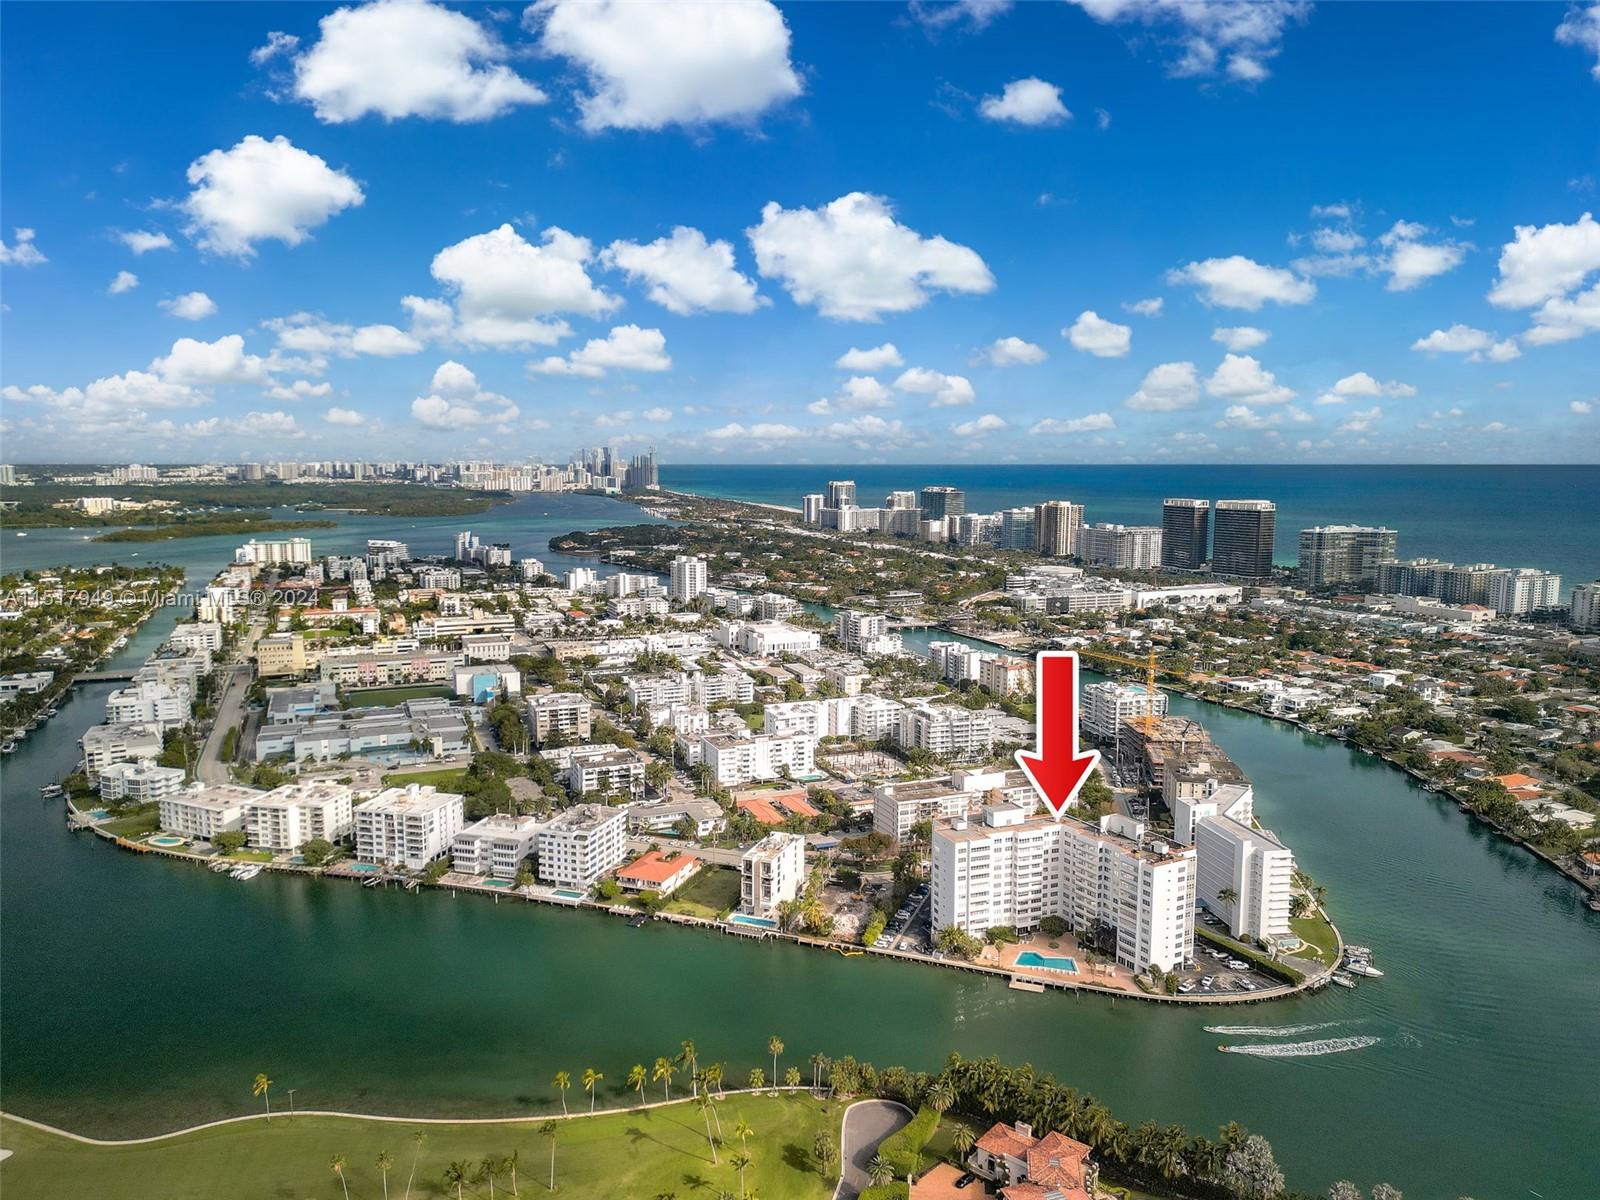 Enjoy panoramic views of Biscayne Bay and Indian Creek golf course from this 1150 SF condo at Blair House, Bay Harbor Islands. Minutes from Bal Harbour and across from the Intracoastal, this bright condo features impact windows, and a large walk-in closet, and is small and dog-friendly.  This 1 bed/den, 1.5 bath unit with 9 ft ceilings can convert to 2/2. Blair House, a mid-century icon, offers ample storage, impact windows, a concierge, free valet,  A/C maintenance, and is close to beaches, Restaurants, Coffee Shops, and shopping. Updated amenities include a new lobby, resort-style pool, and no fixed bridges, perfect for boating enthusiasts. Max occupants 2 people per Florida Statue.